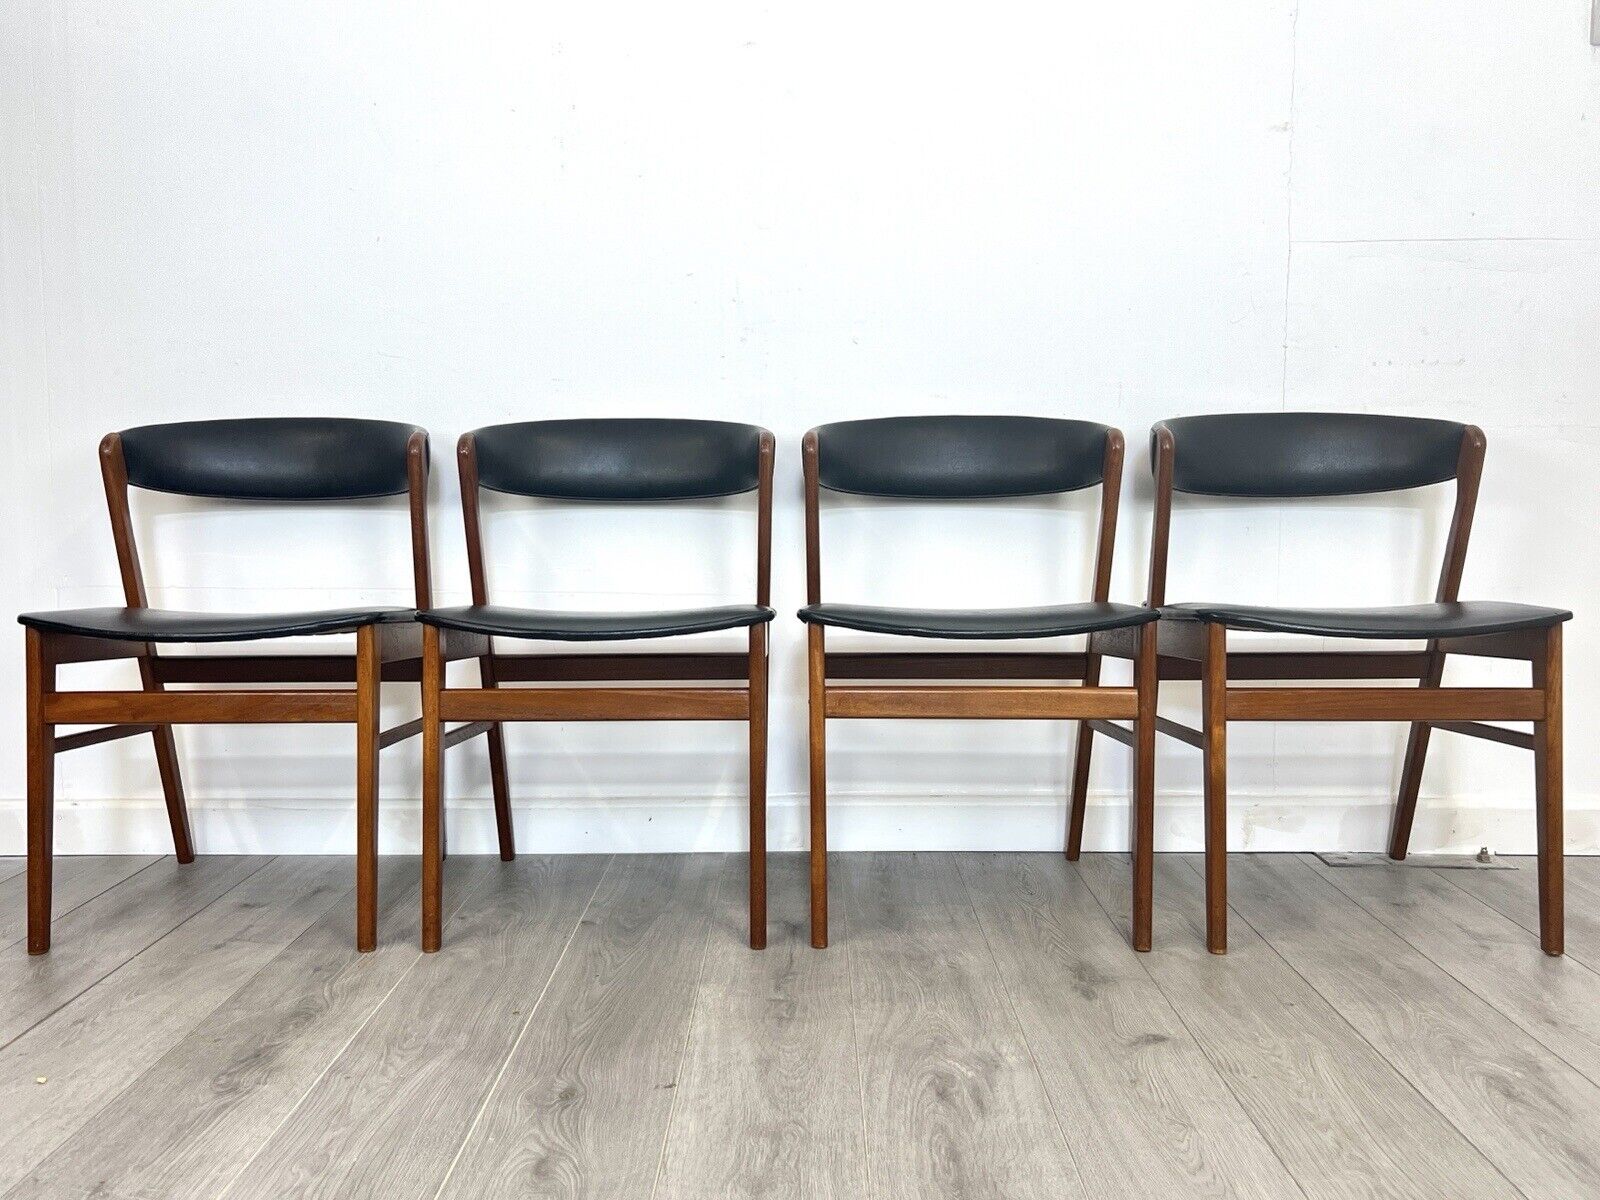 Sax, Set of 4 Mid Century Teak and Leatherette Dining Chairs